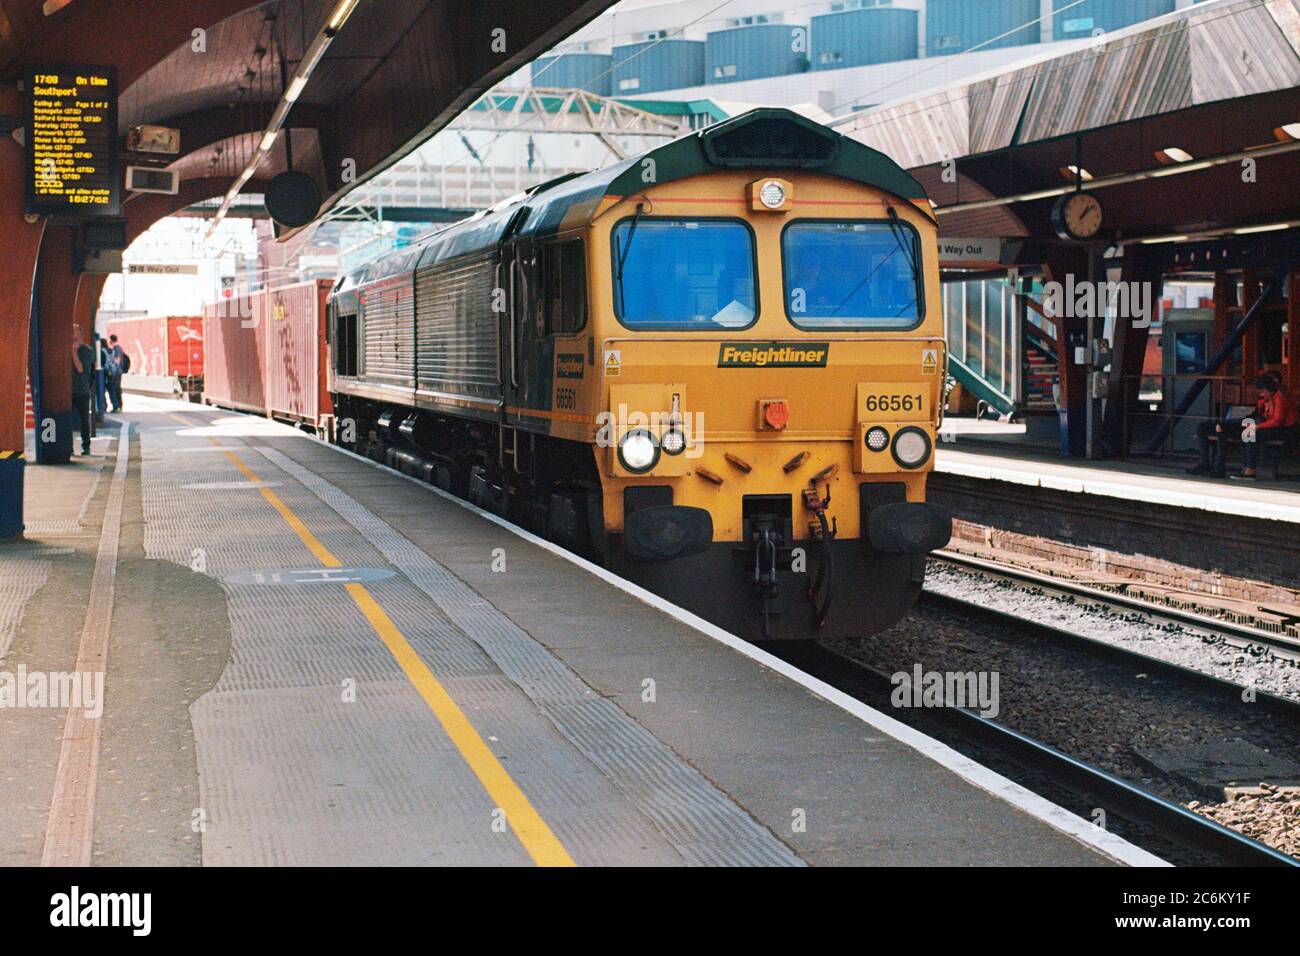 Manchester, UK - 6 July 2020: A freight train operating by Freightliner through Manchester Oxford Road Station platform 3. Stock Photo